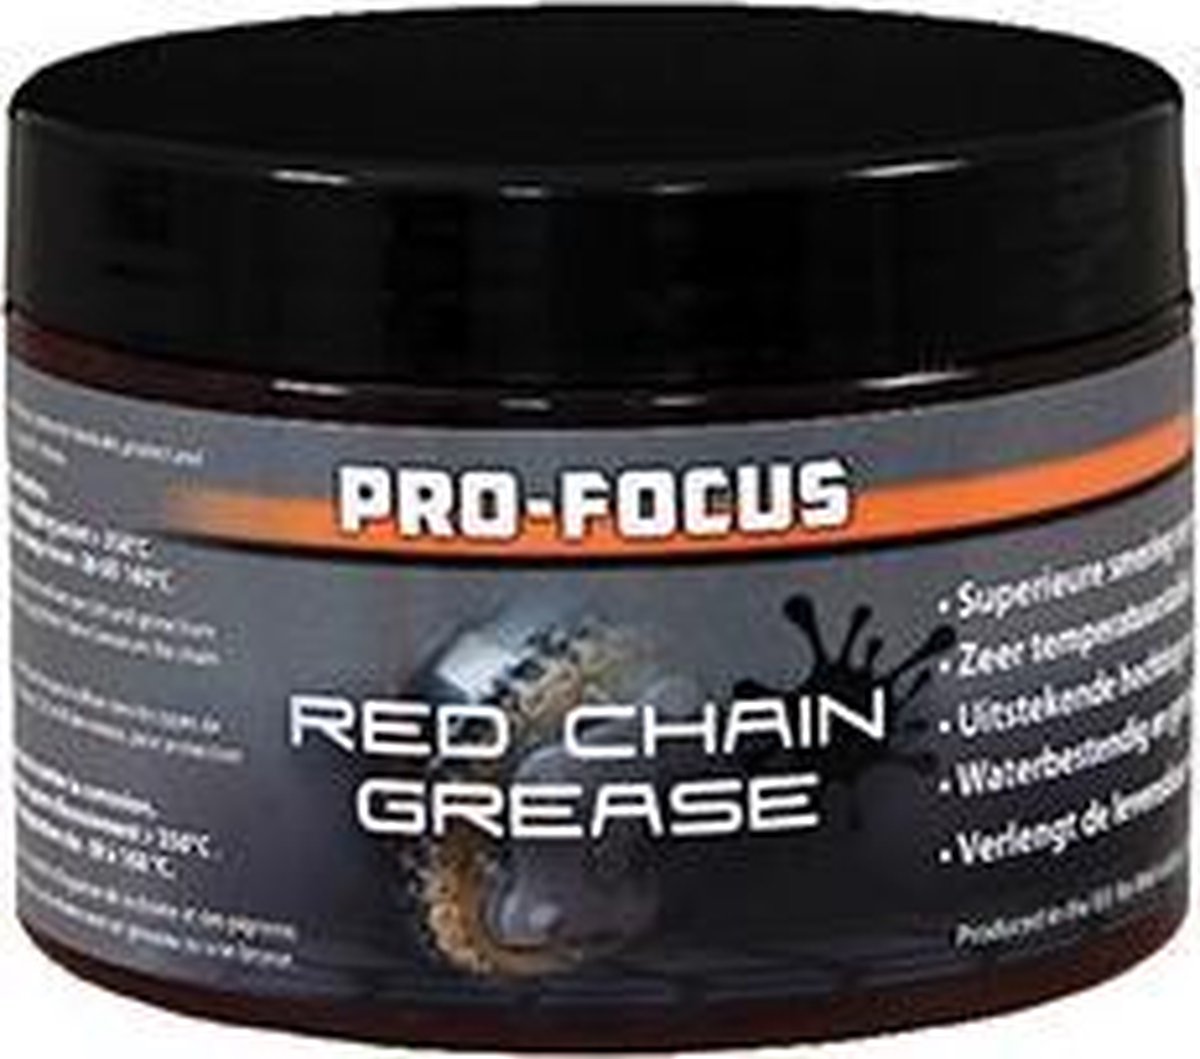 Pro-Focus Red Chain Grease